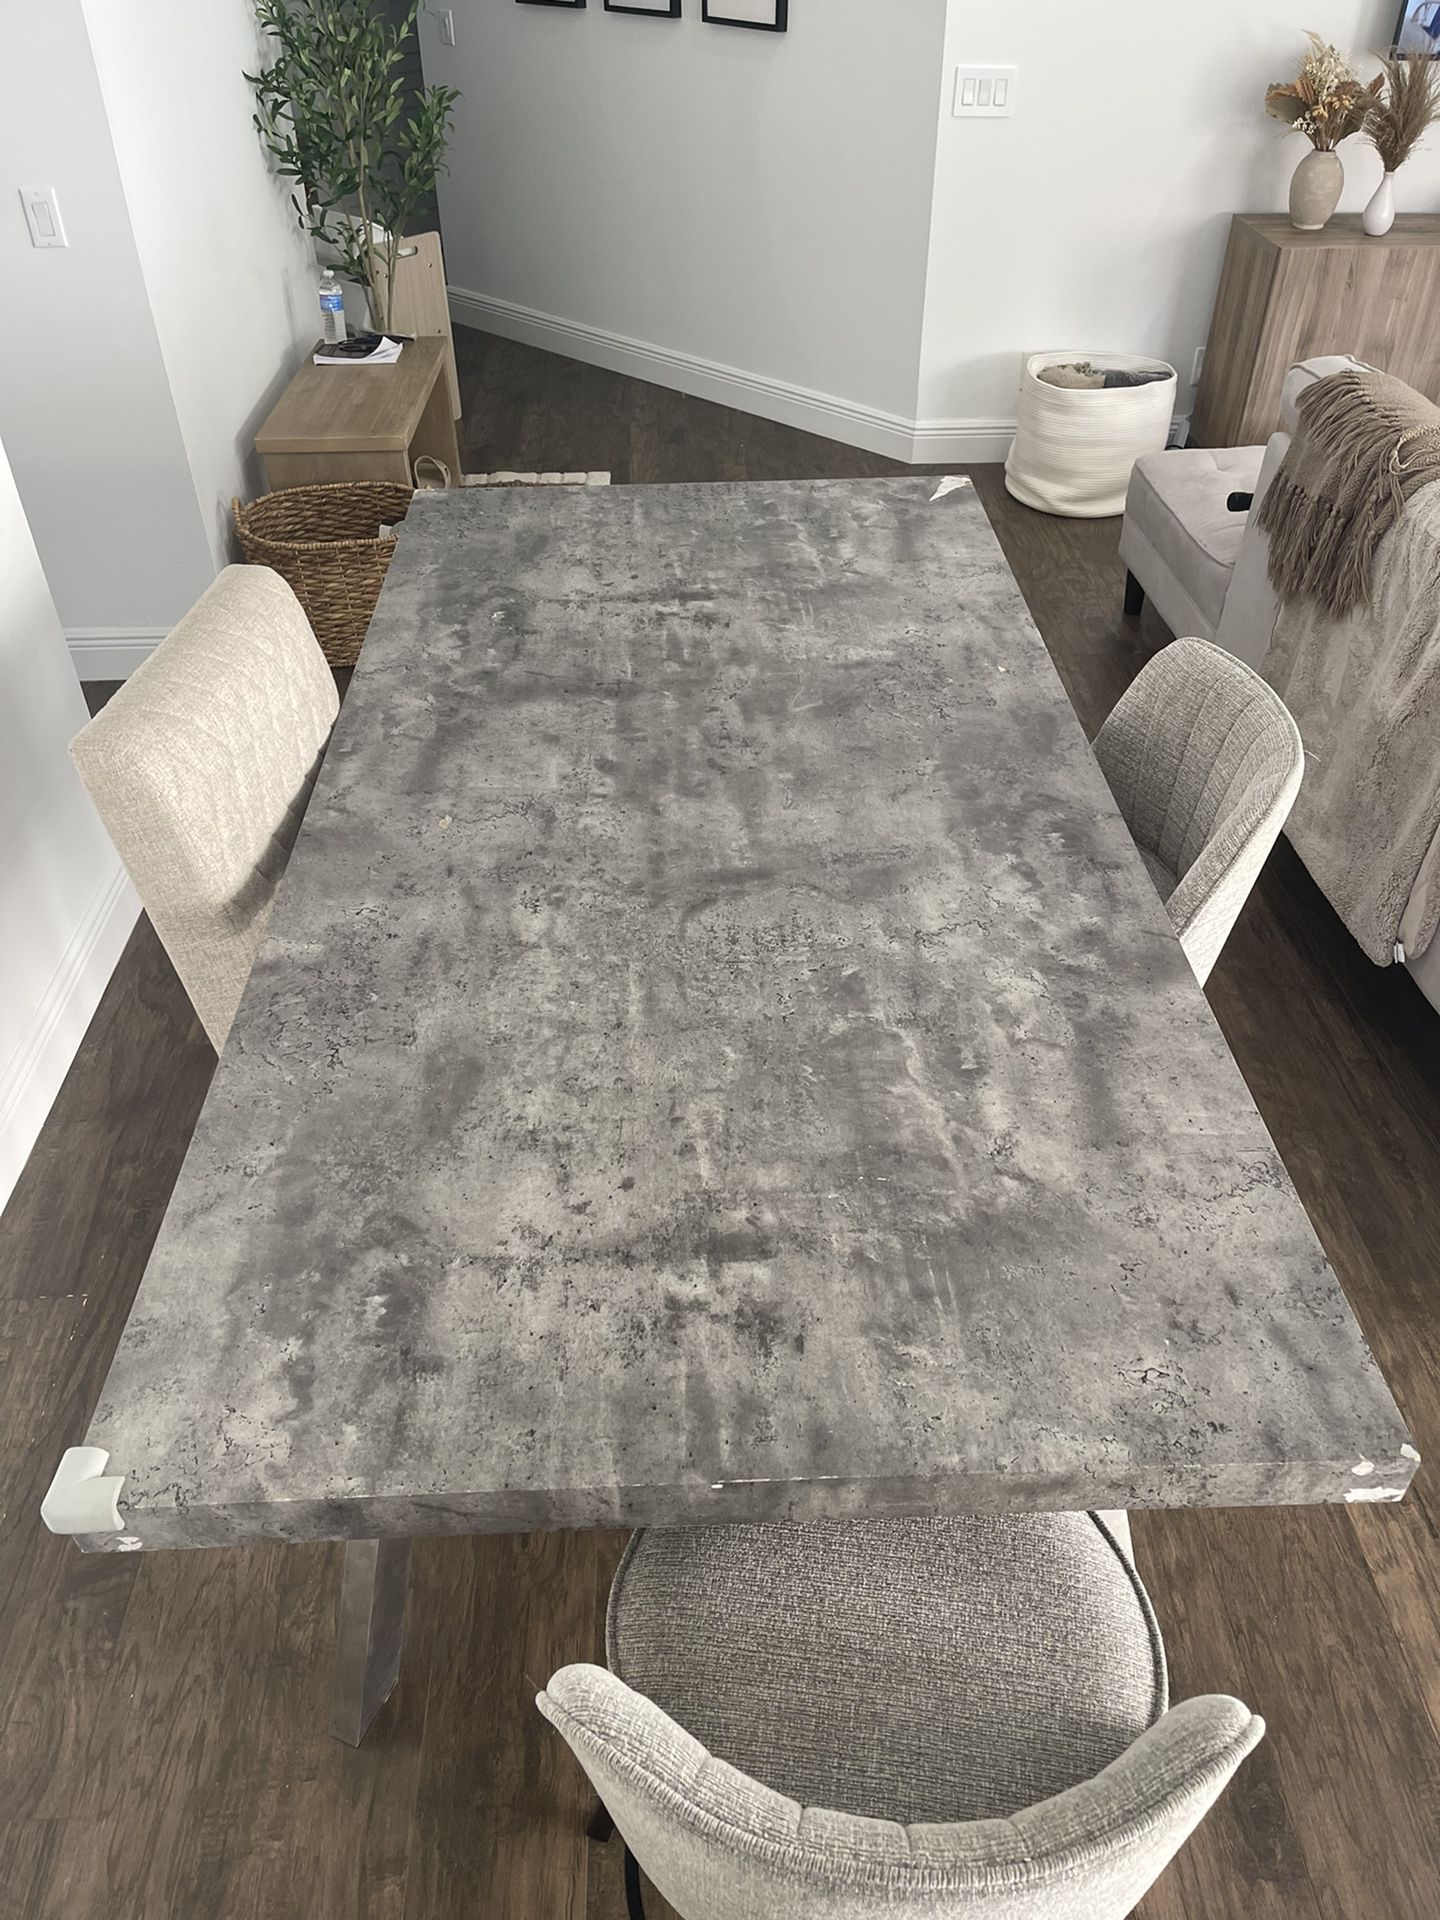   Dining Table 39” width x 79” length x 30 1/2” height 